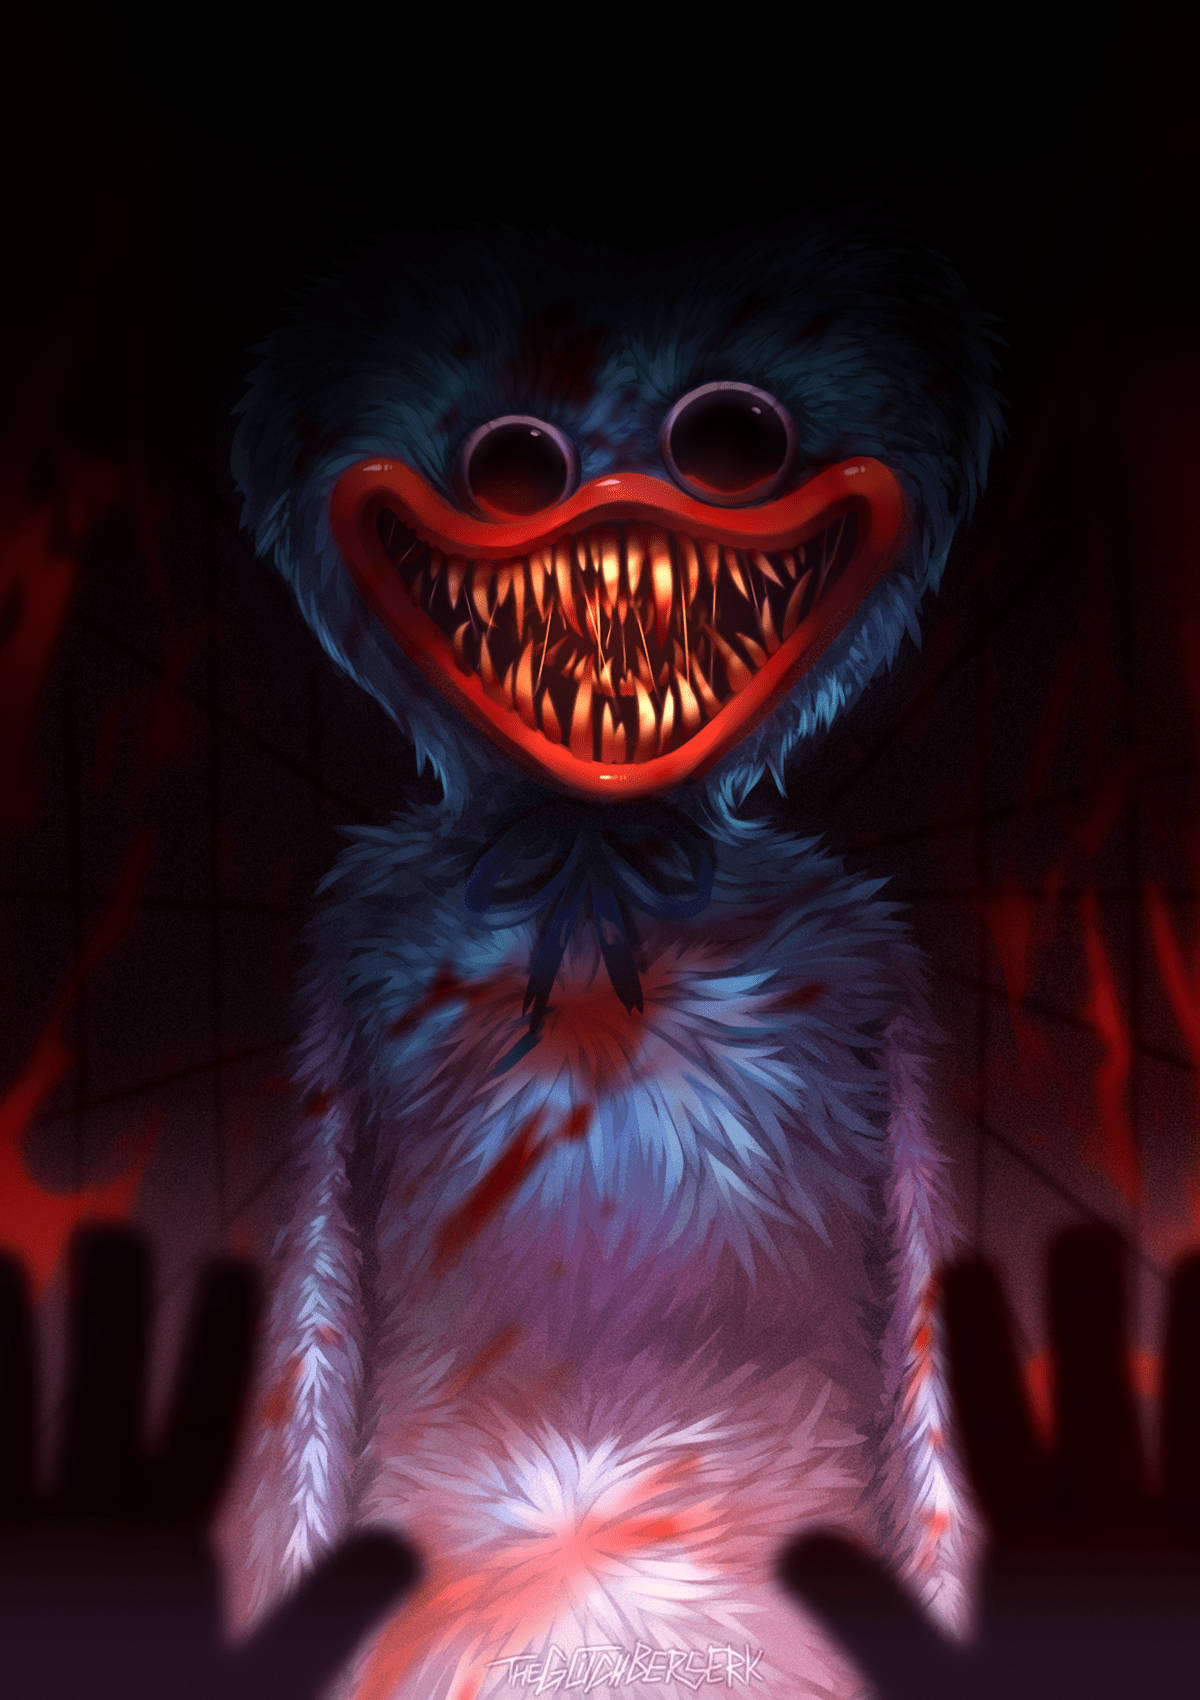 Huggy Wuggy revealing razor-sharp teeth in a chilling grin Wallpaper